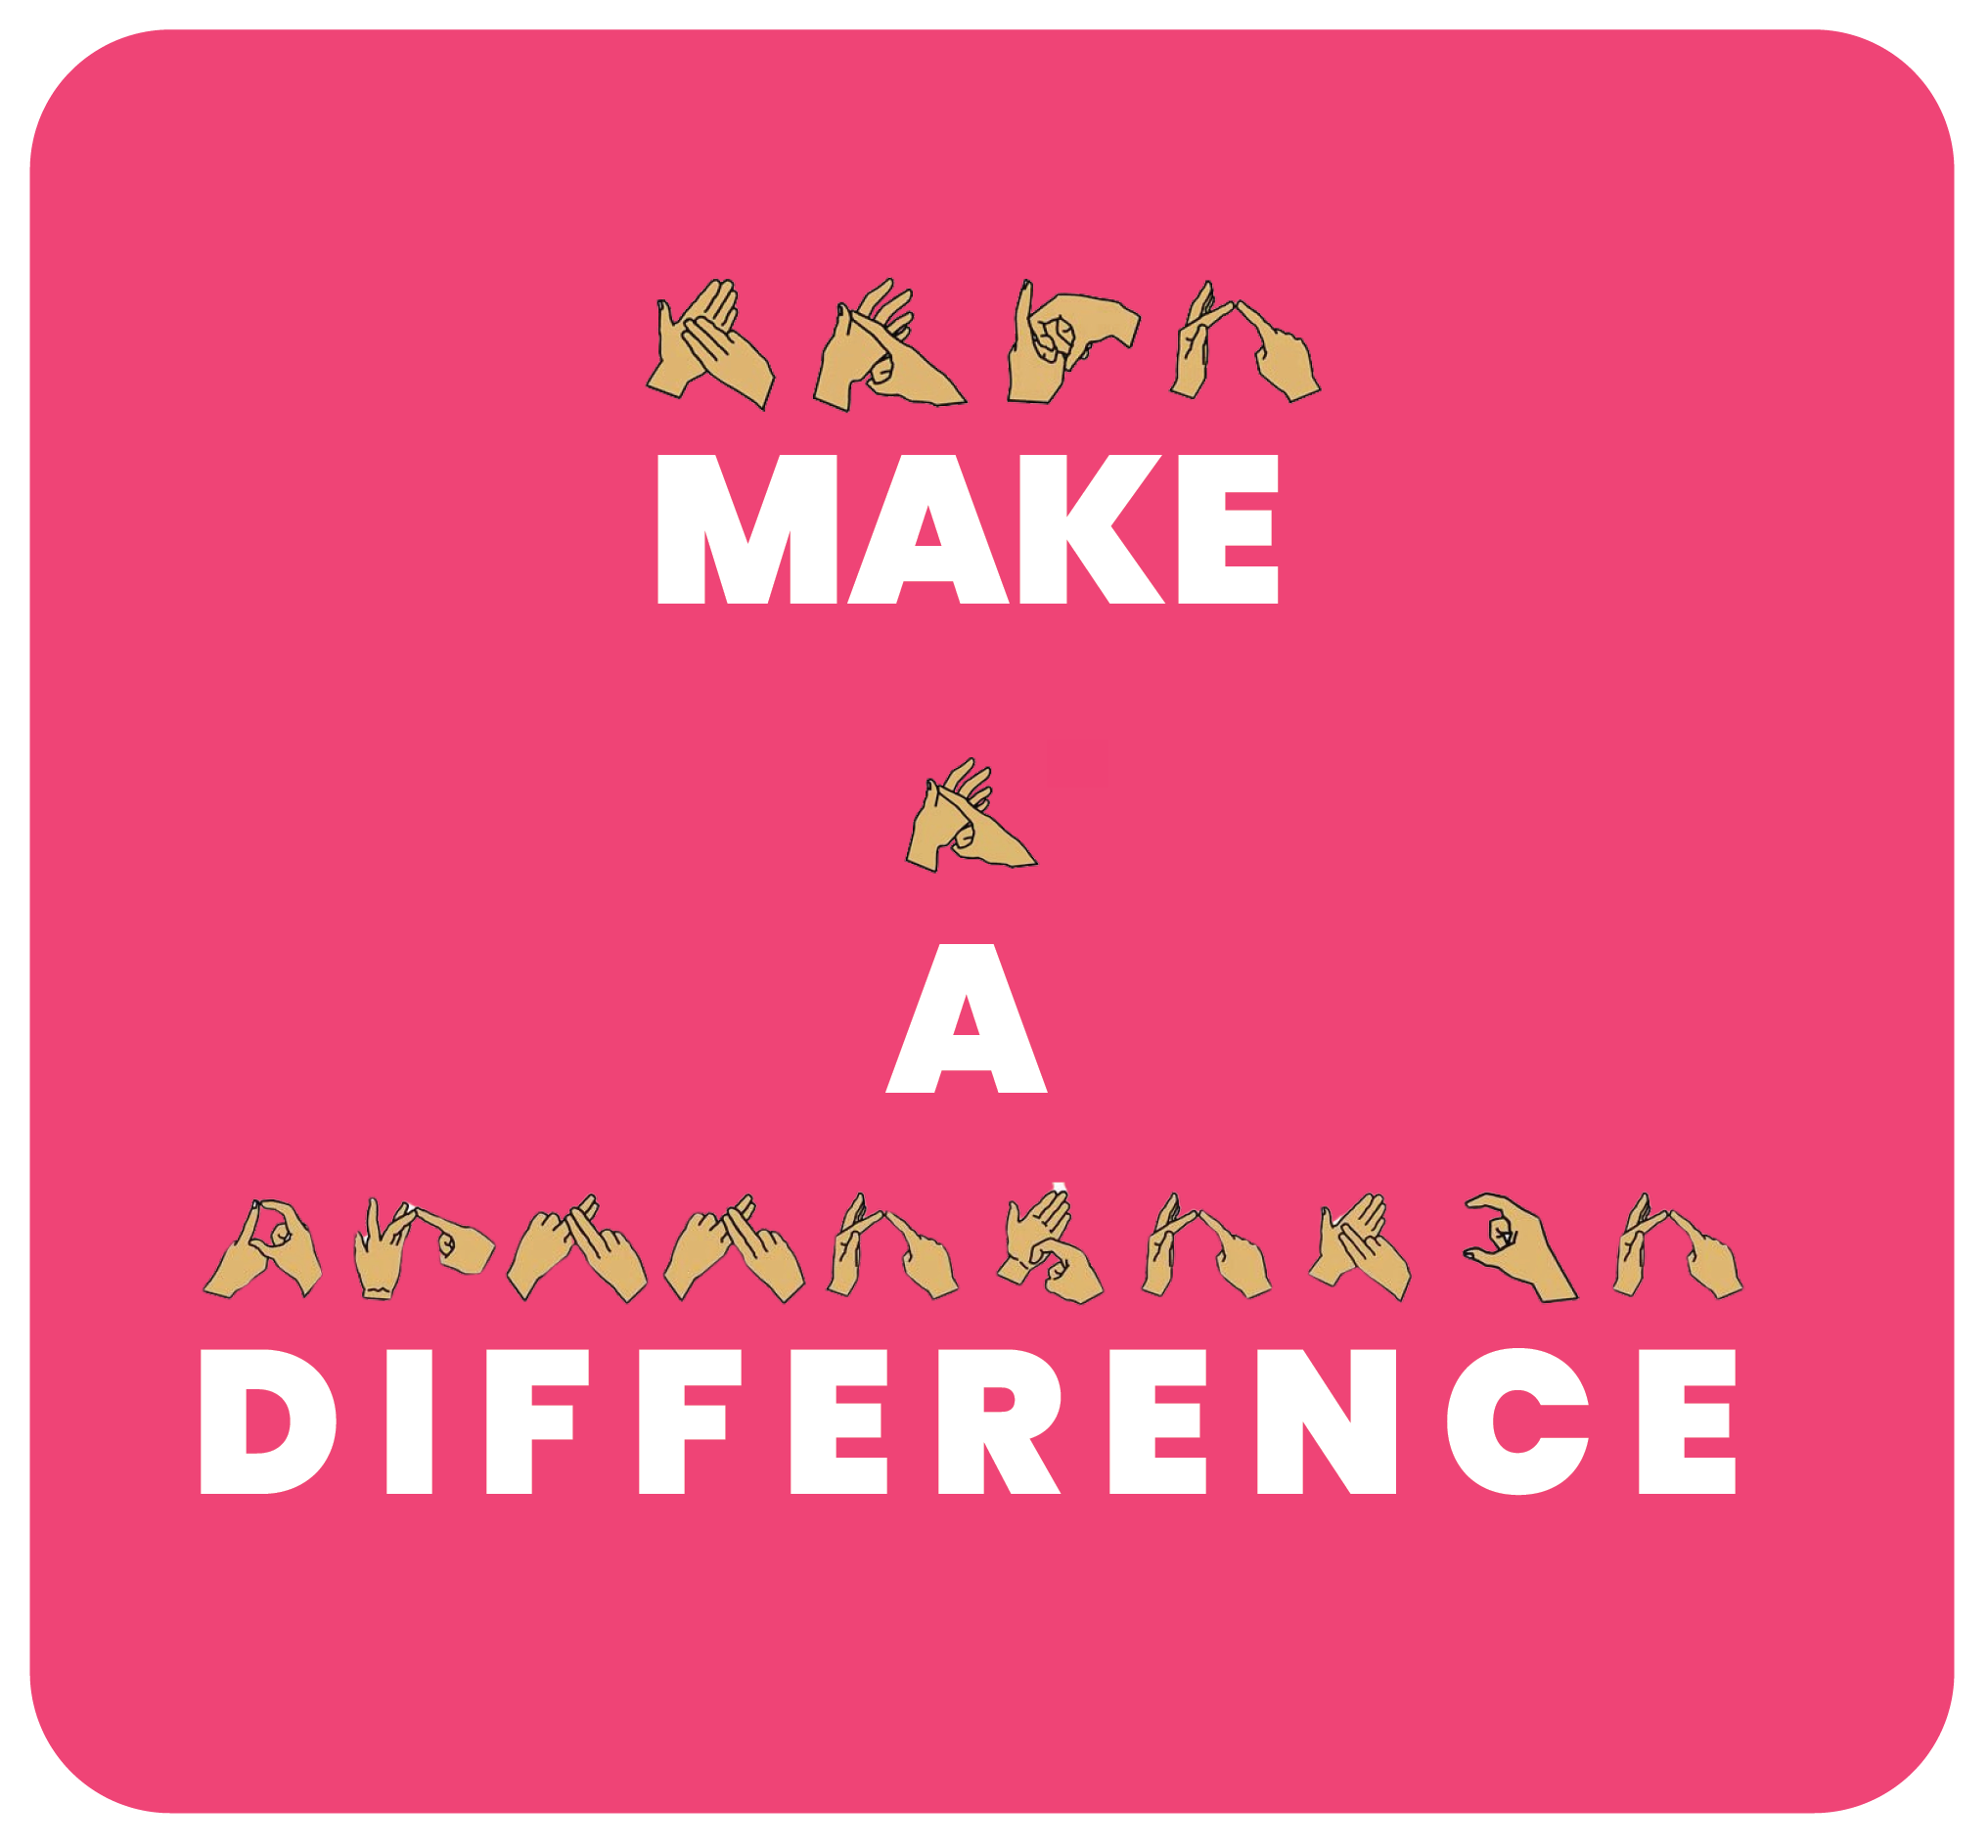 Make A DIFFERENCE